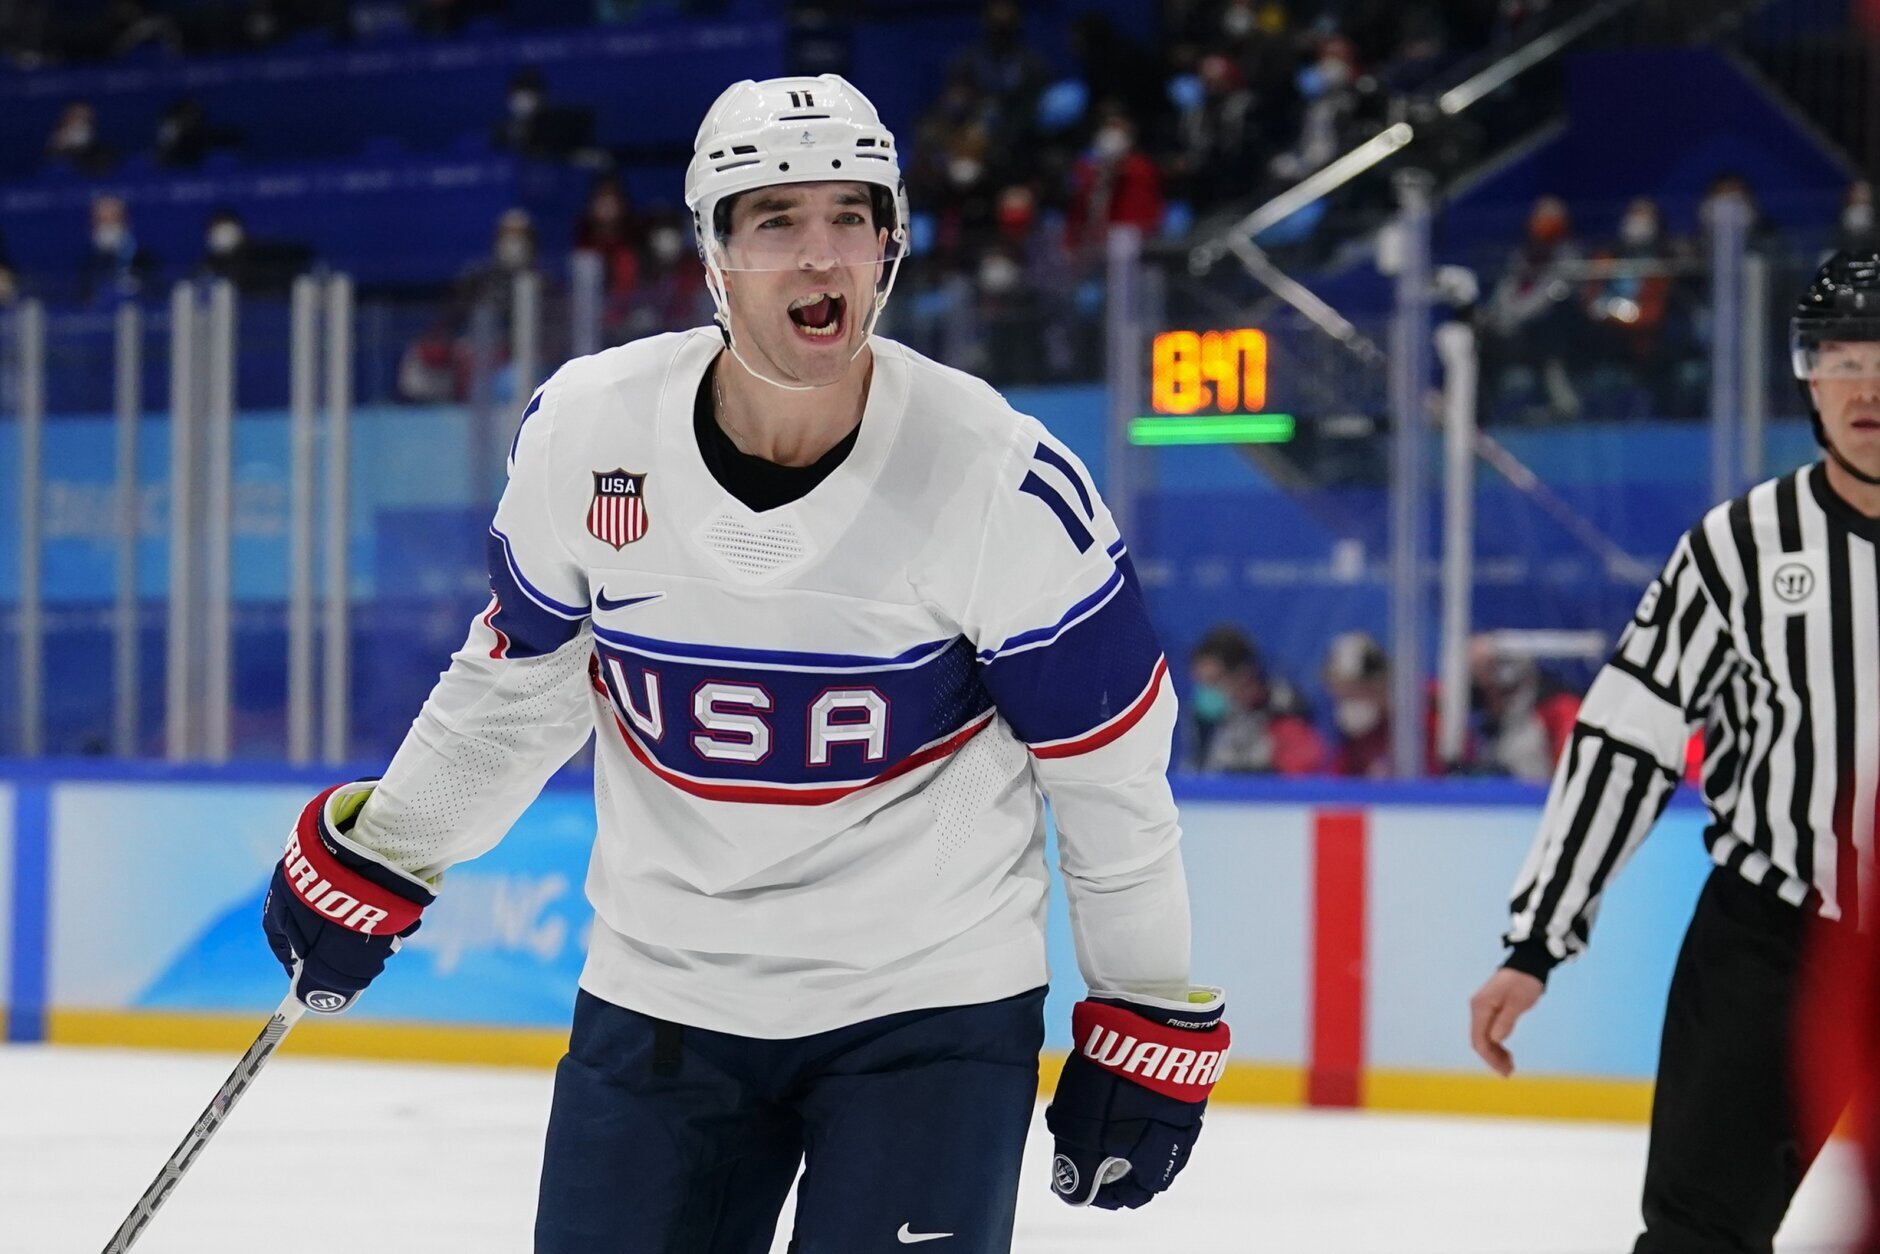 <p>United States&#8217; Kenny Agostino celebrates after scoring a goal against Canada during a preliminary round men&#8217;s hockey game at the 2022 Winter Olympics, Saturday, Feb. 12, 2022, in Beijing.</p>
